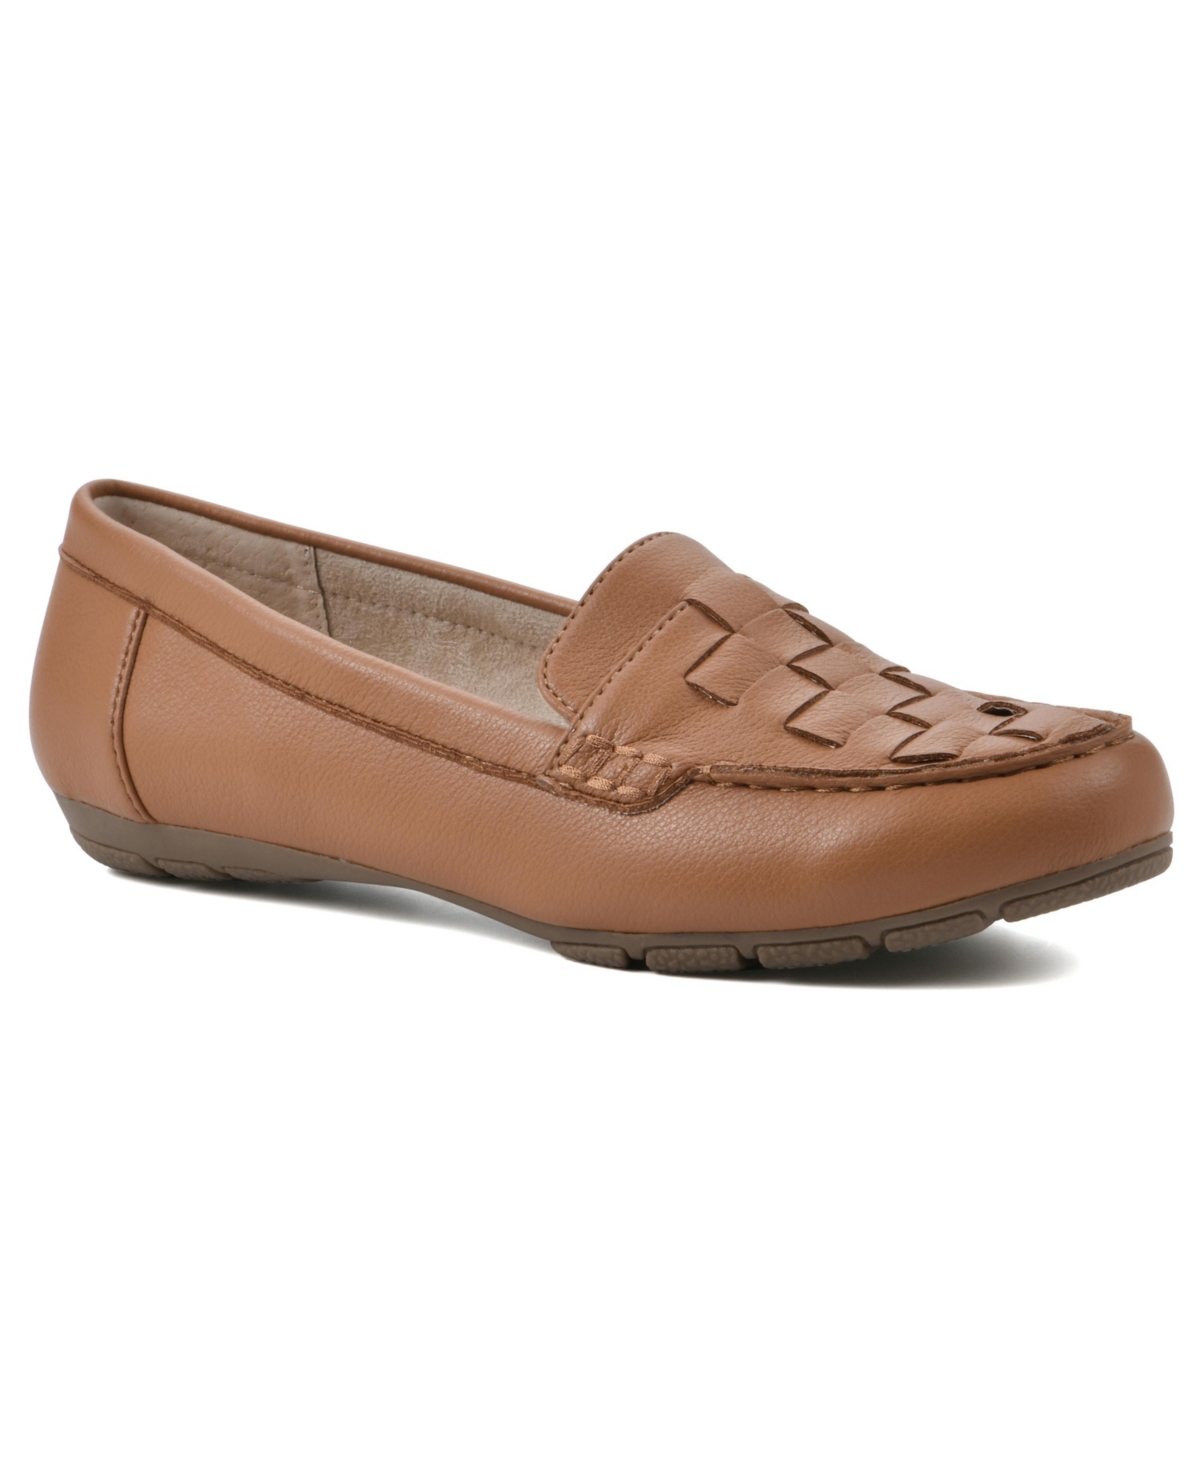 CLIFFS BY WHITE MOUNTAIN CLIFFS BY WHITE MOUNTAIN WOMEN'S GIVER MOC COMFORT LOAFER WOMEN'S SHOES